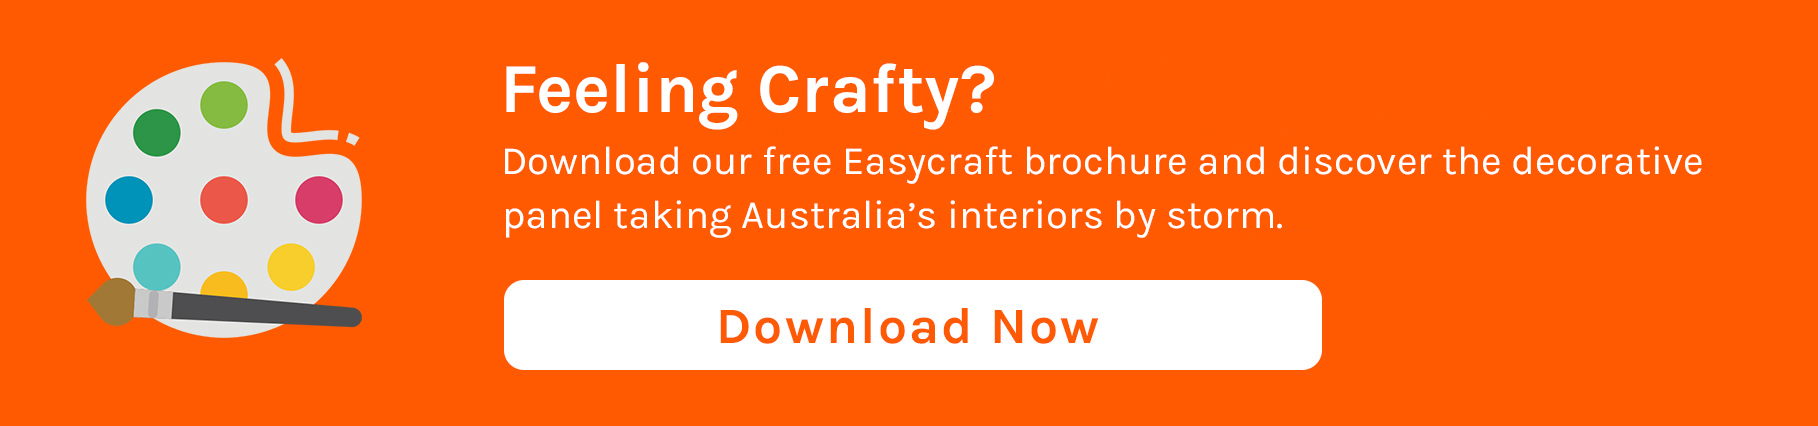 Download Plyco's free Easycraft product brochure